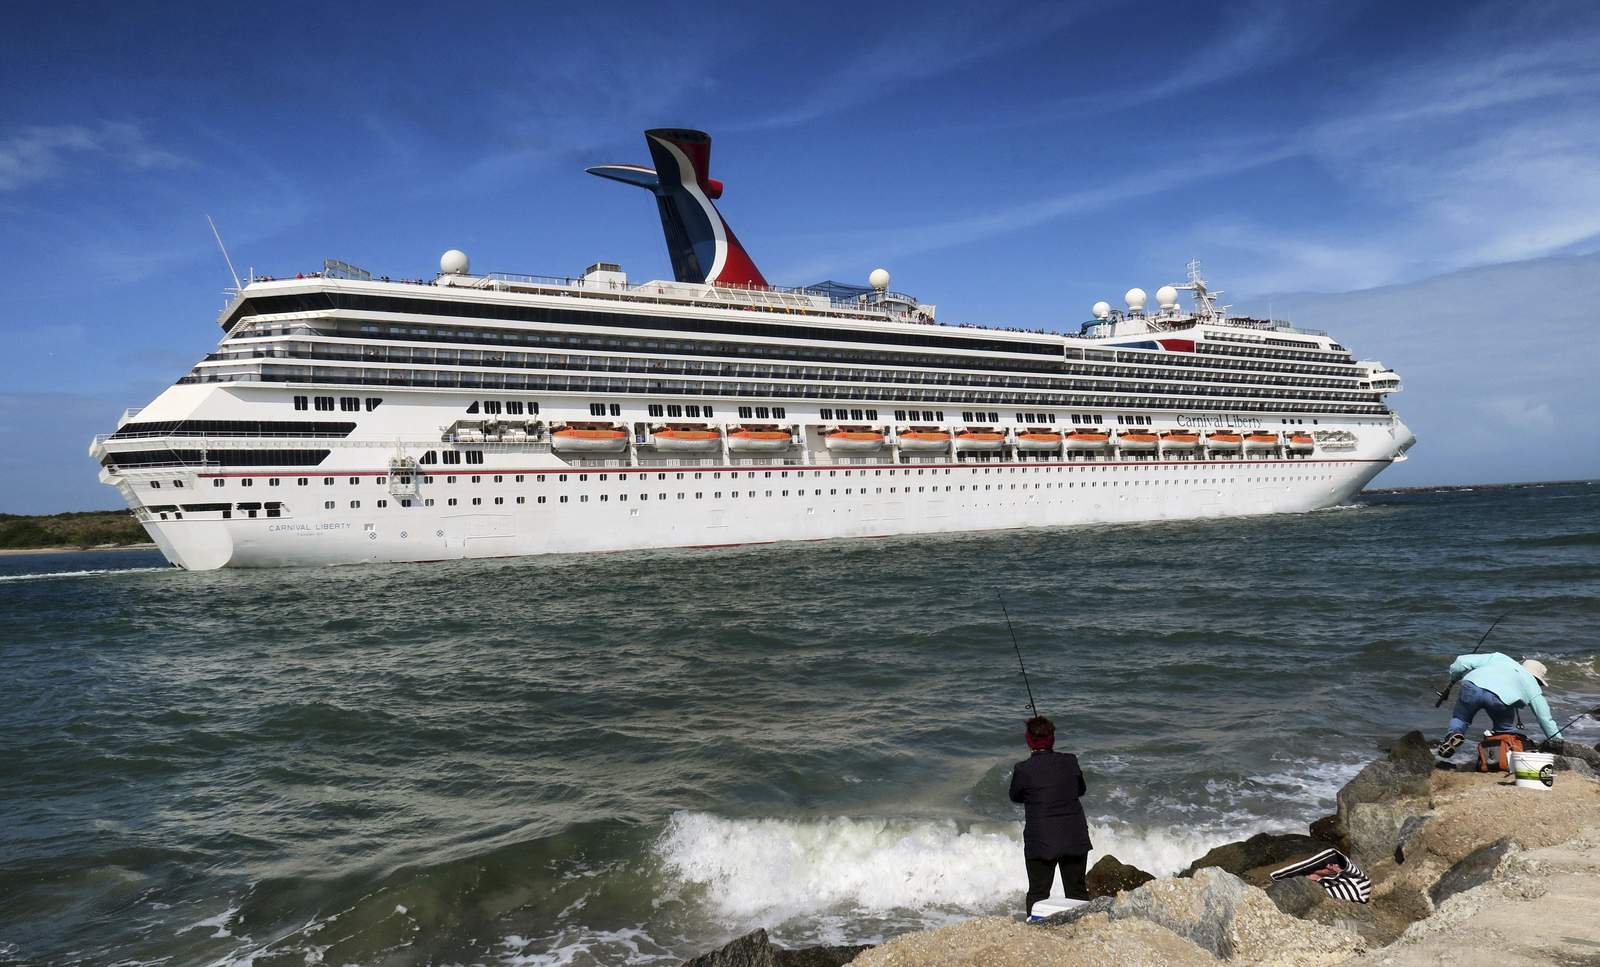 US cruises suspended until at least end of October due to COVID-19